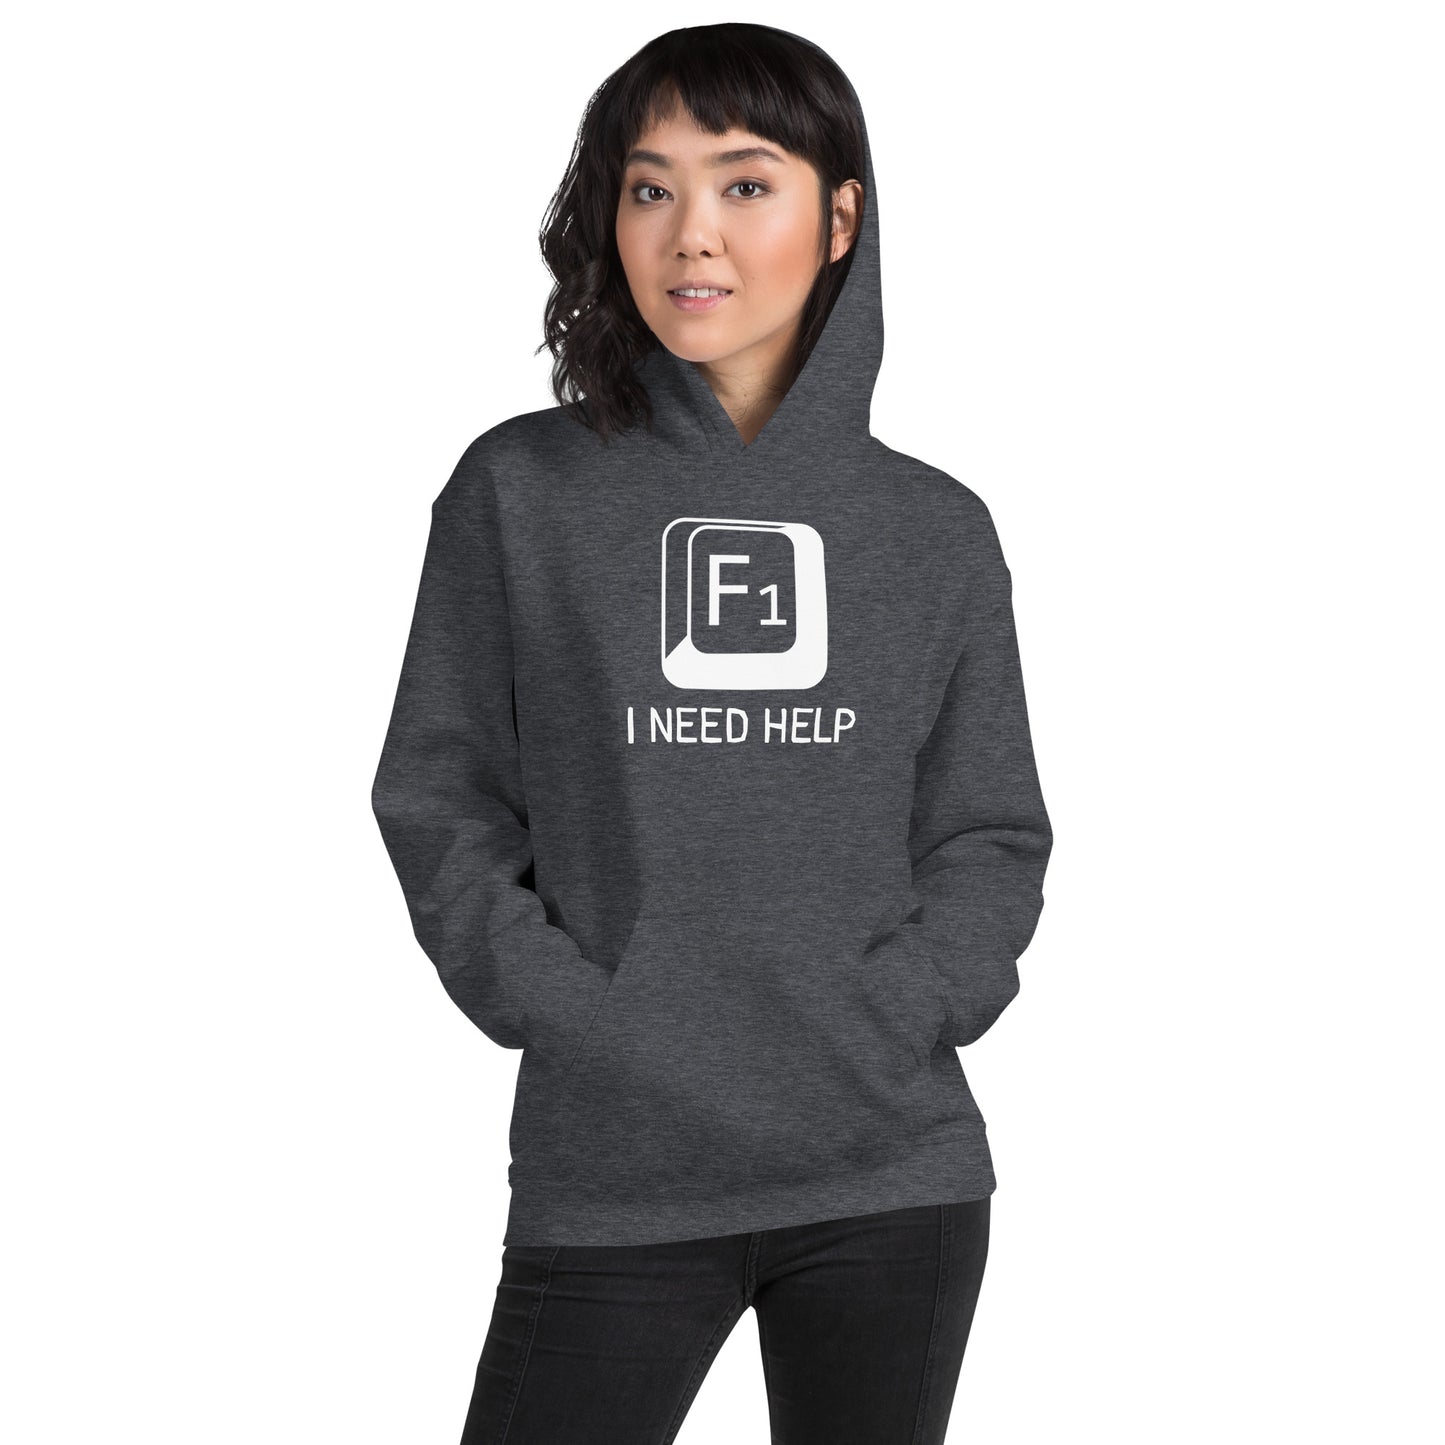 Women with dark heather hoodie and a picture of F1 key with text "I need help"